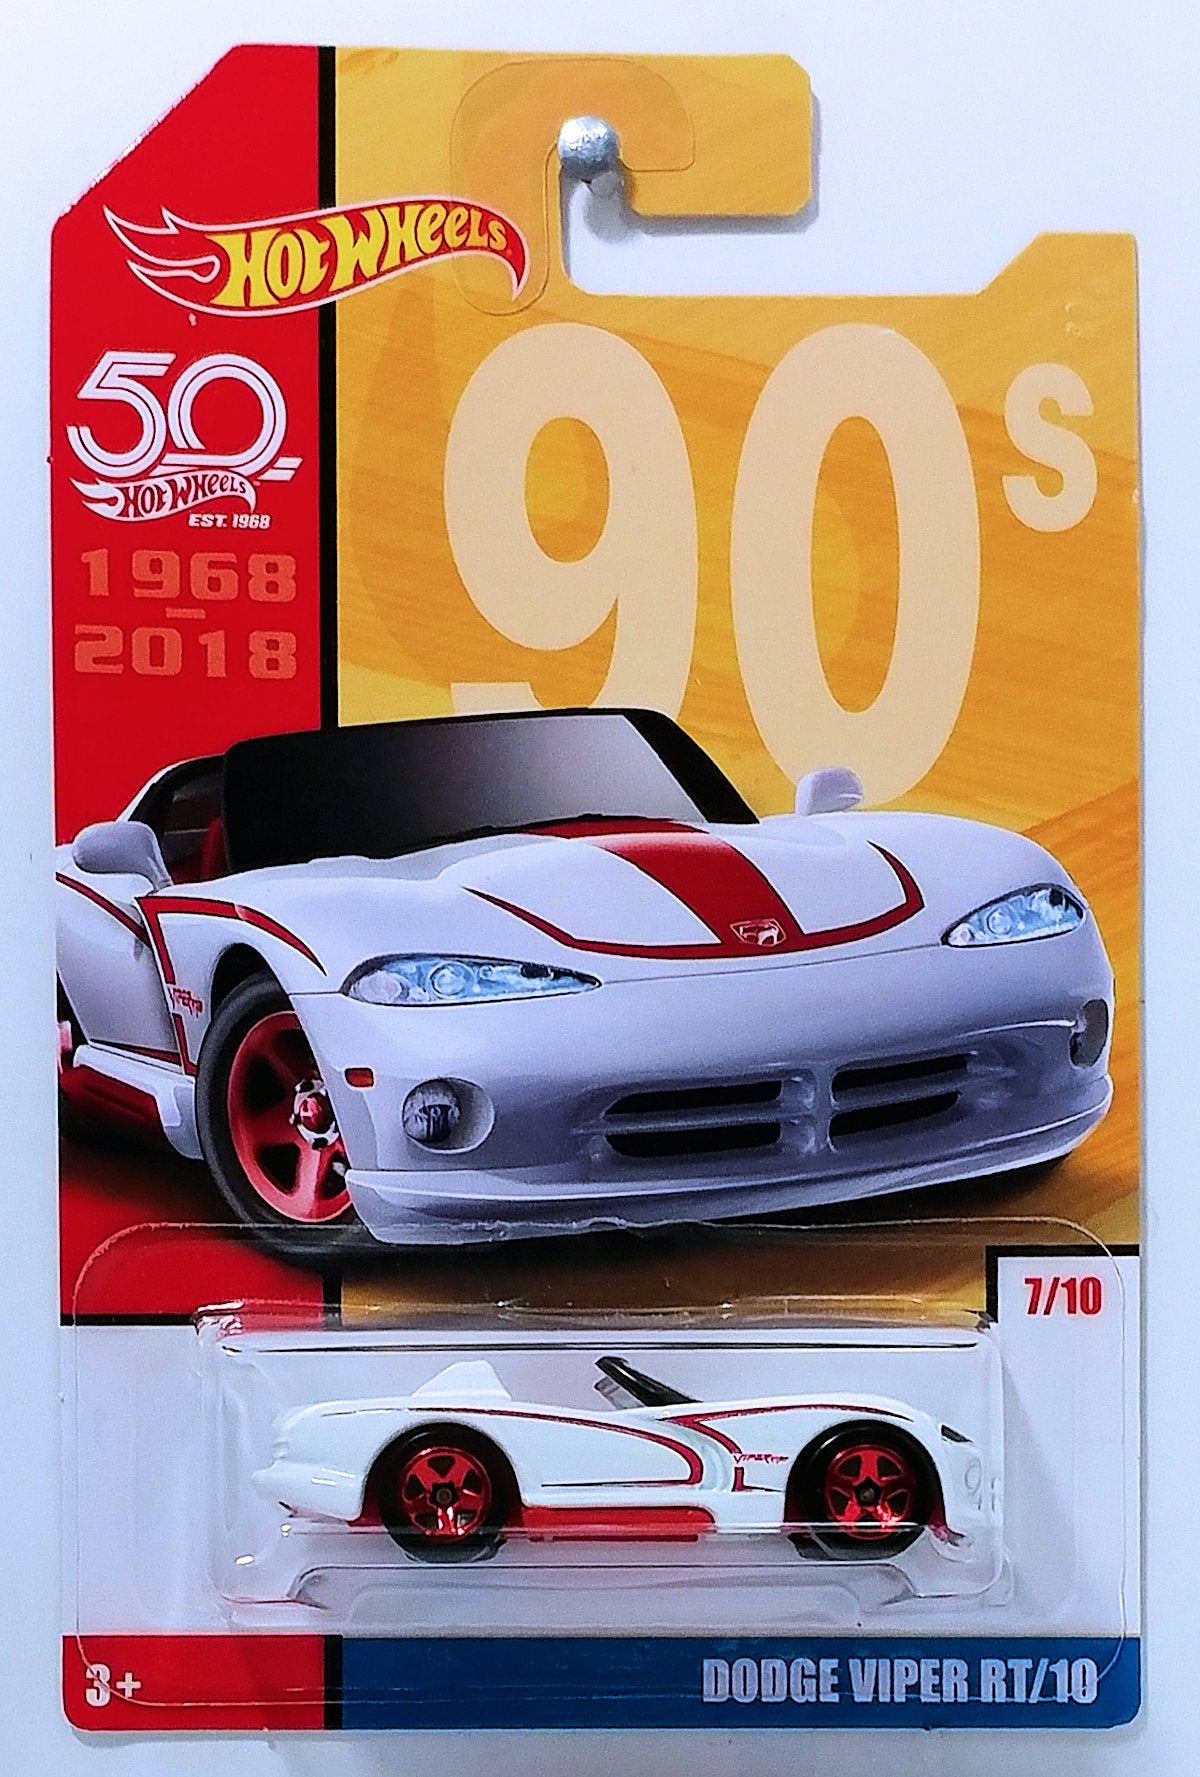 Hot Wheels 2018 - 50th Anniversary / Throwback Collection 07/10 - Dodge Viper RT/10 - White - Target Exclusive